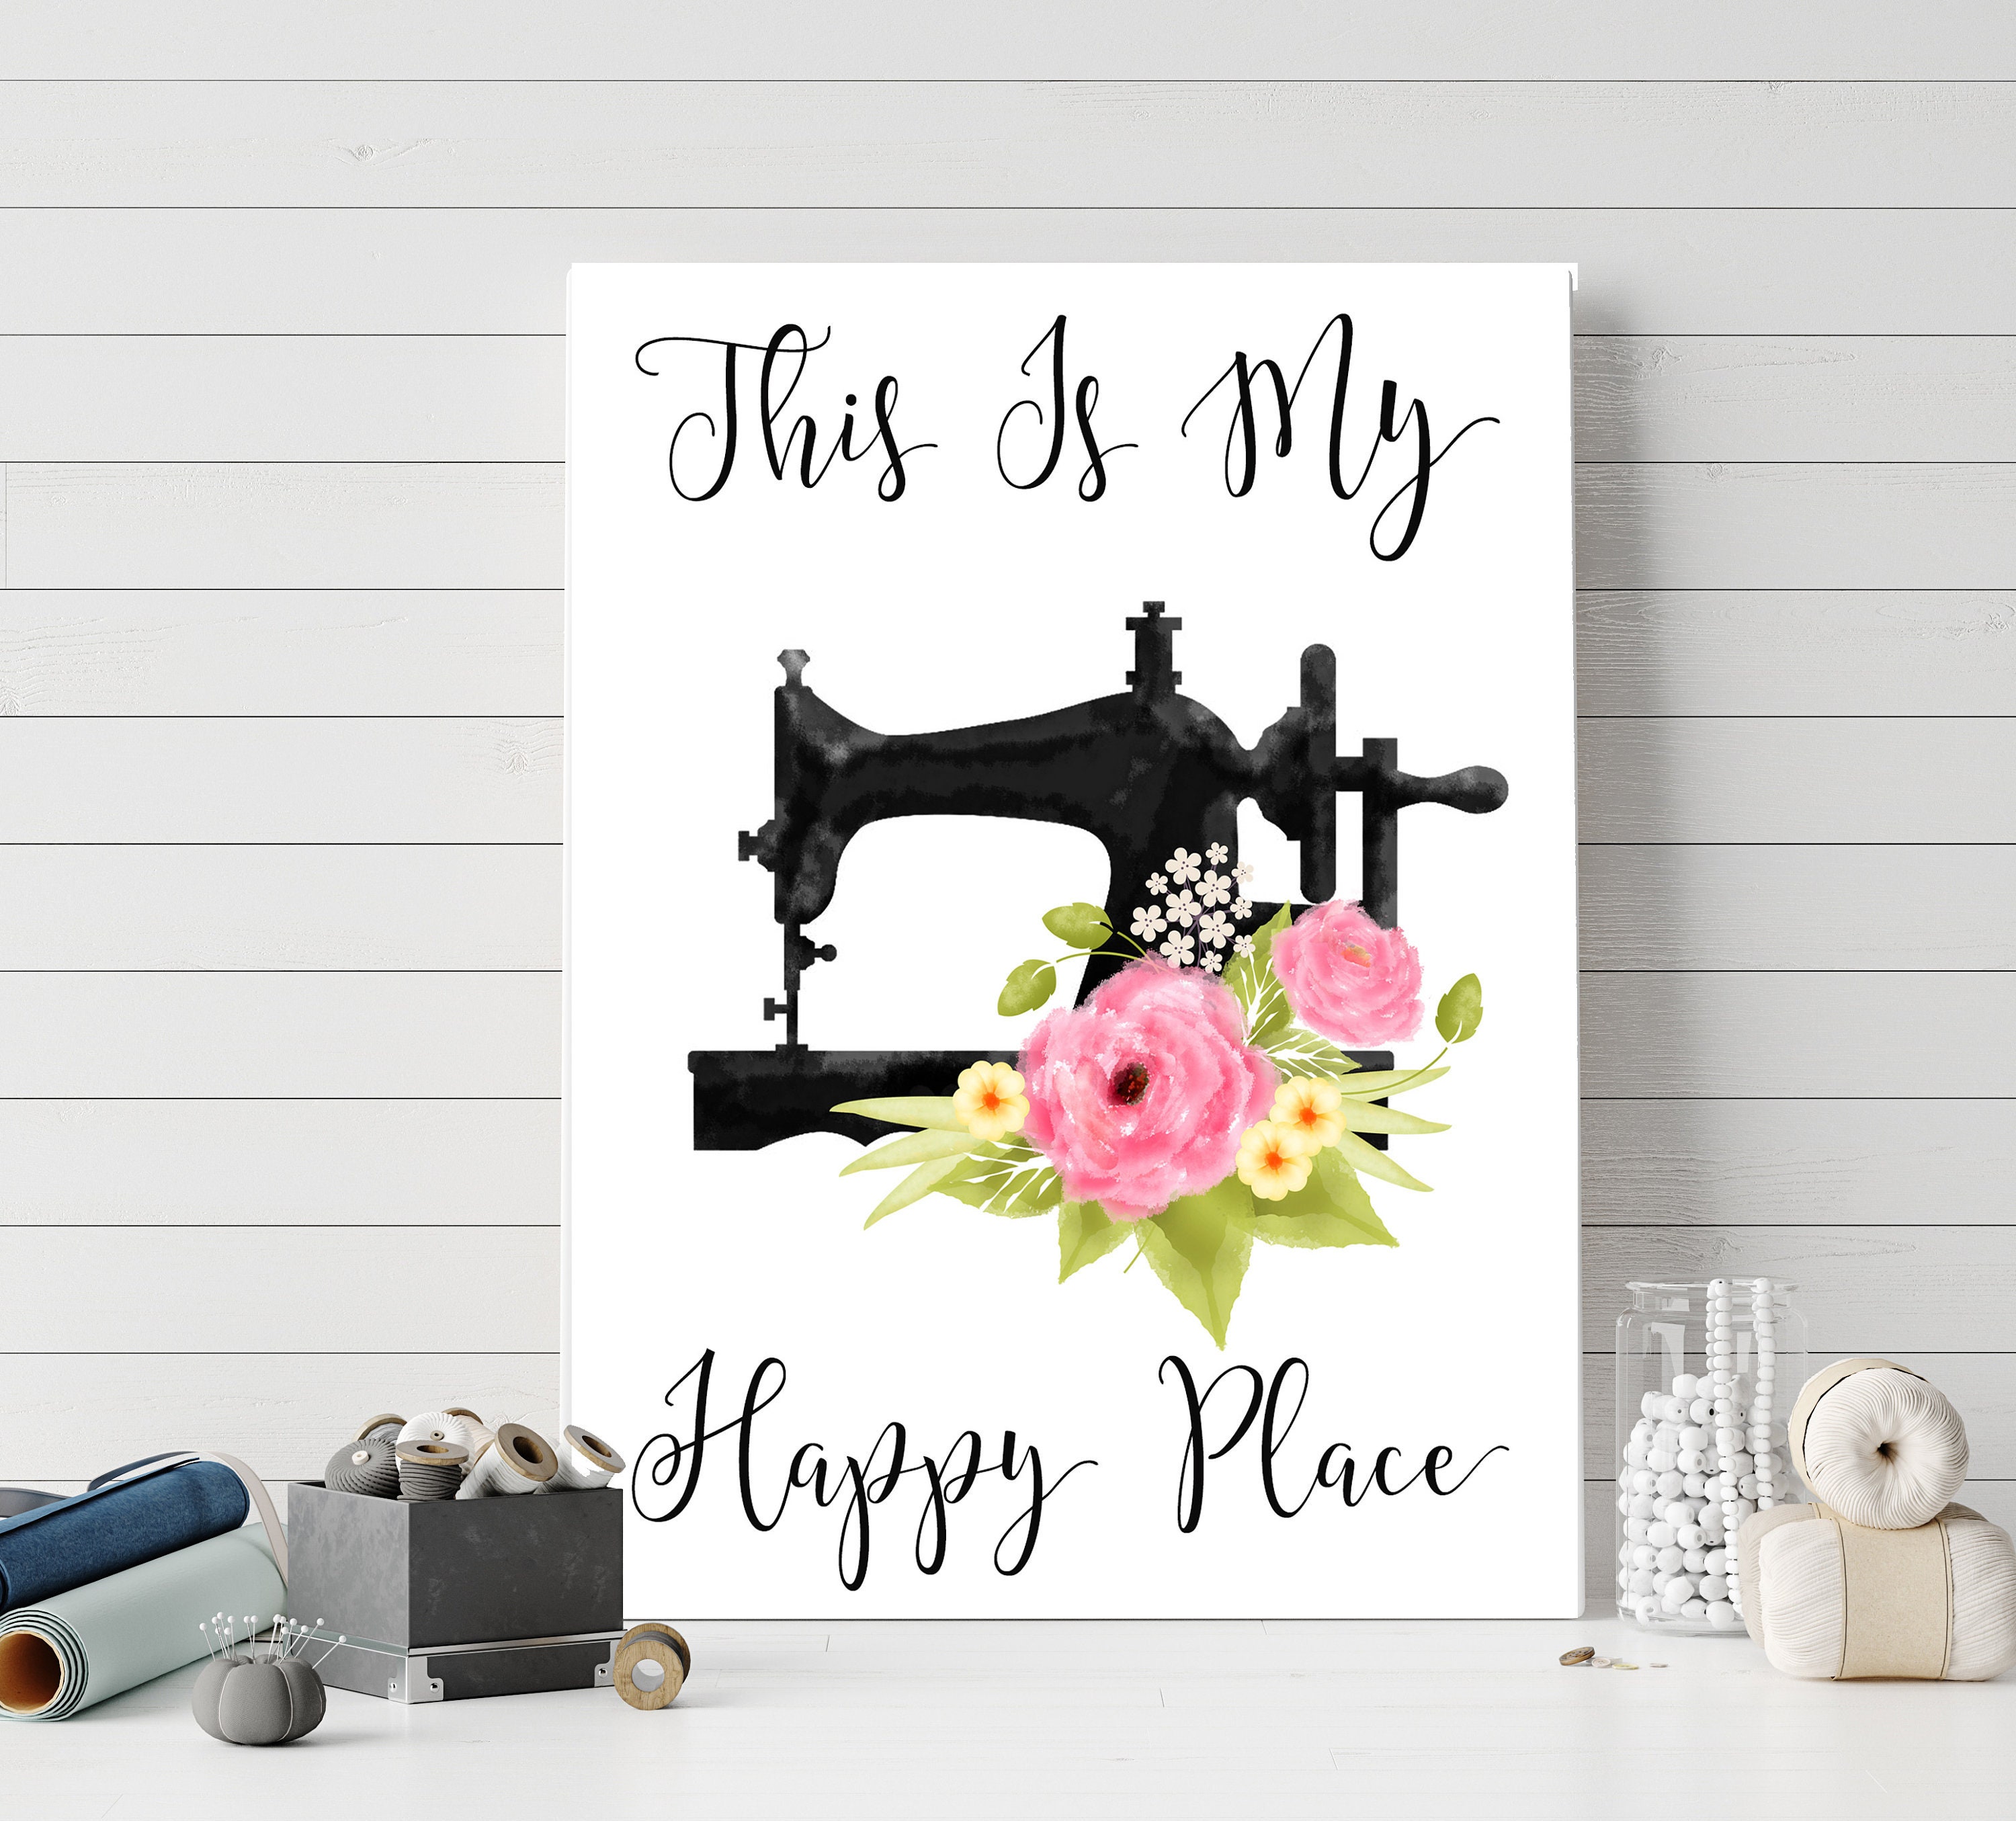 Sewing Lover Sewing Room Is Happy Place Gift Idea Digital Art by